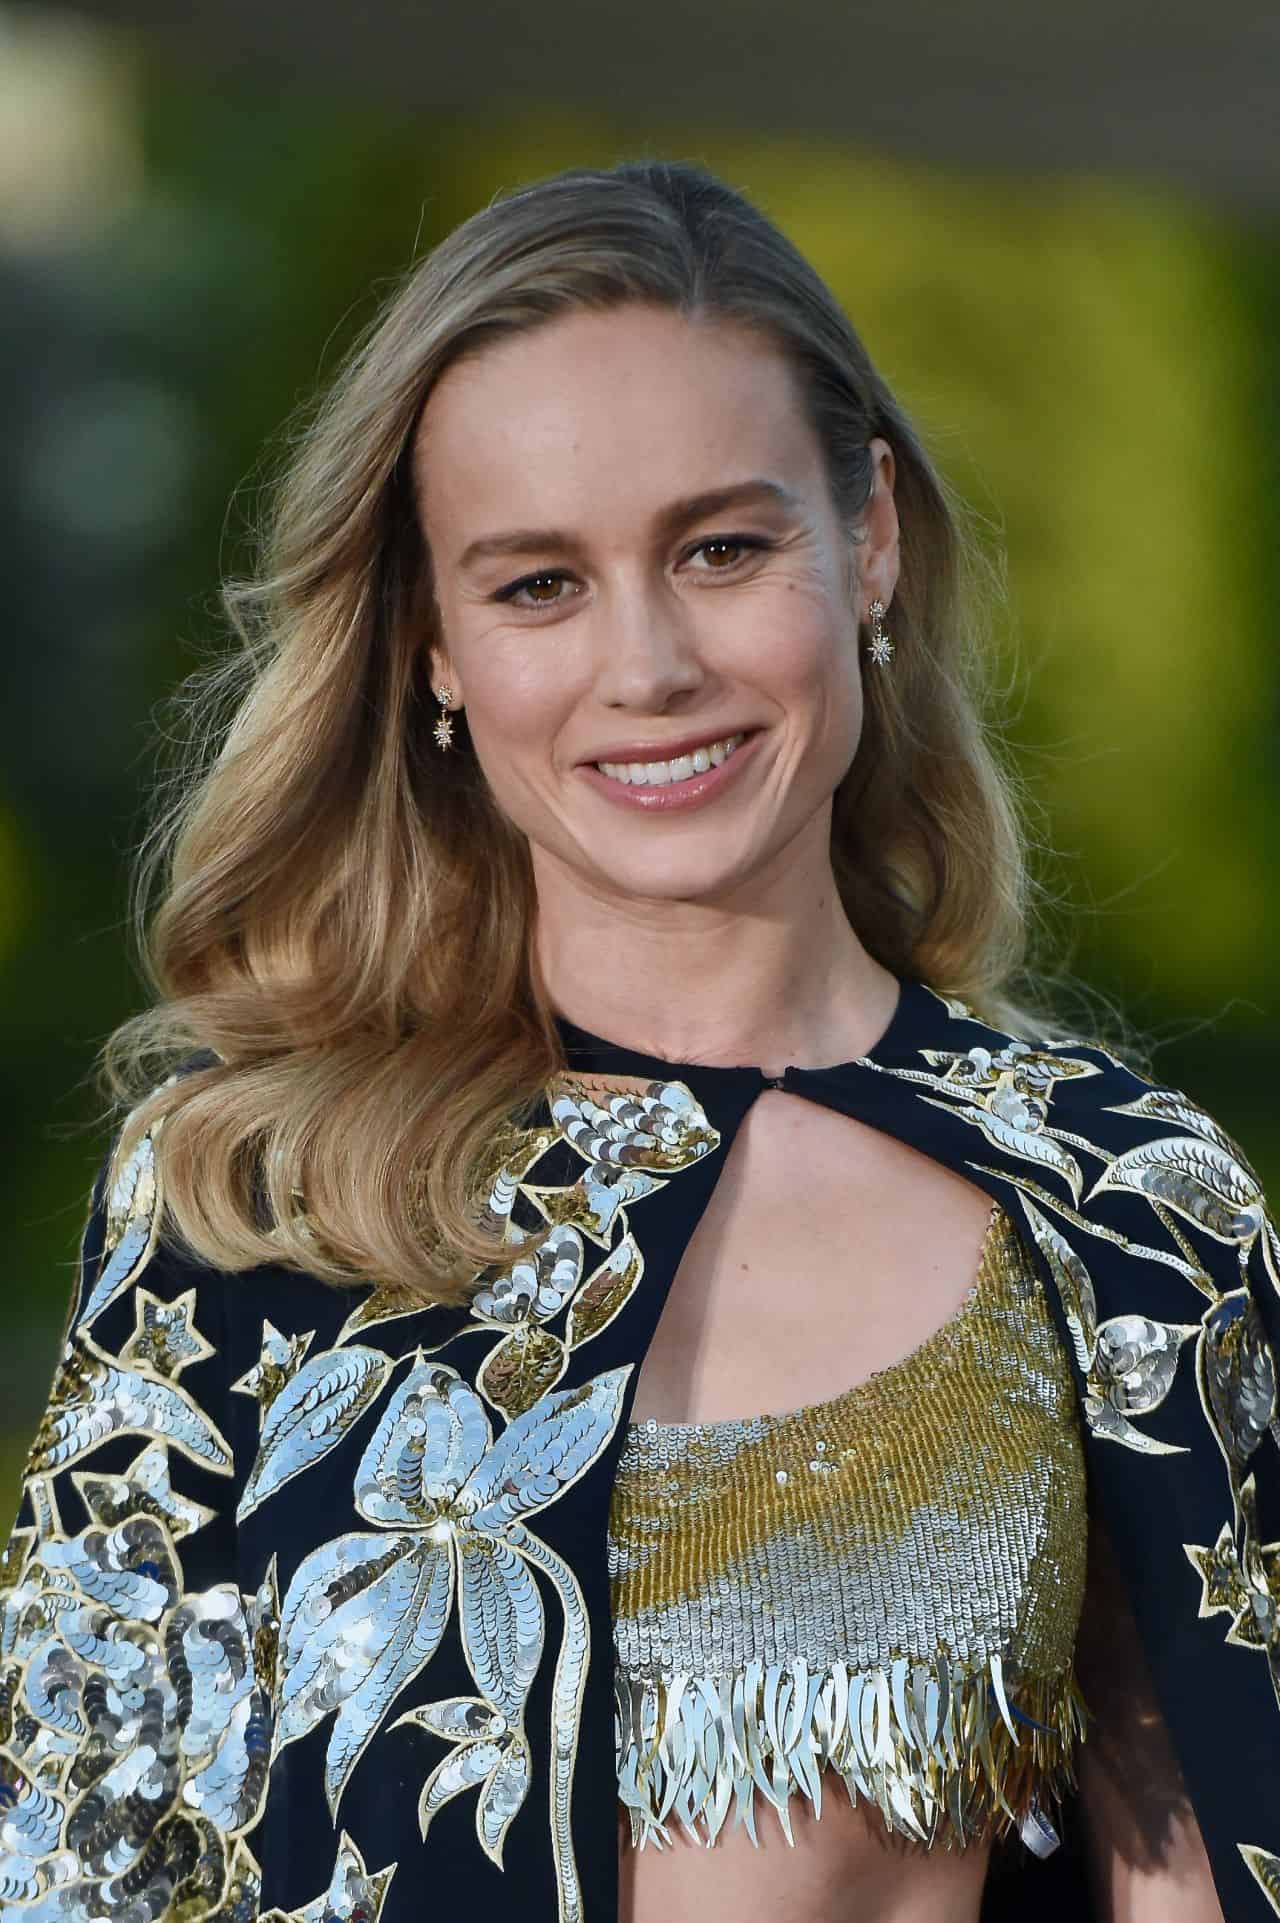 Brie Larson Wows All at the "Marvel Avengers Campus" Opening Ceremony at Disneyland Paris